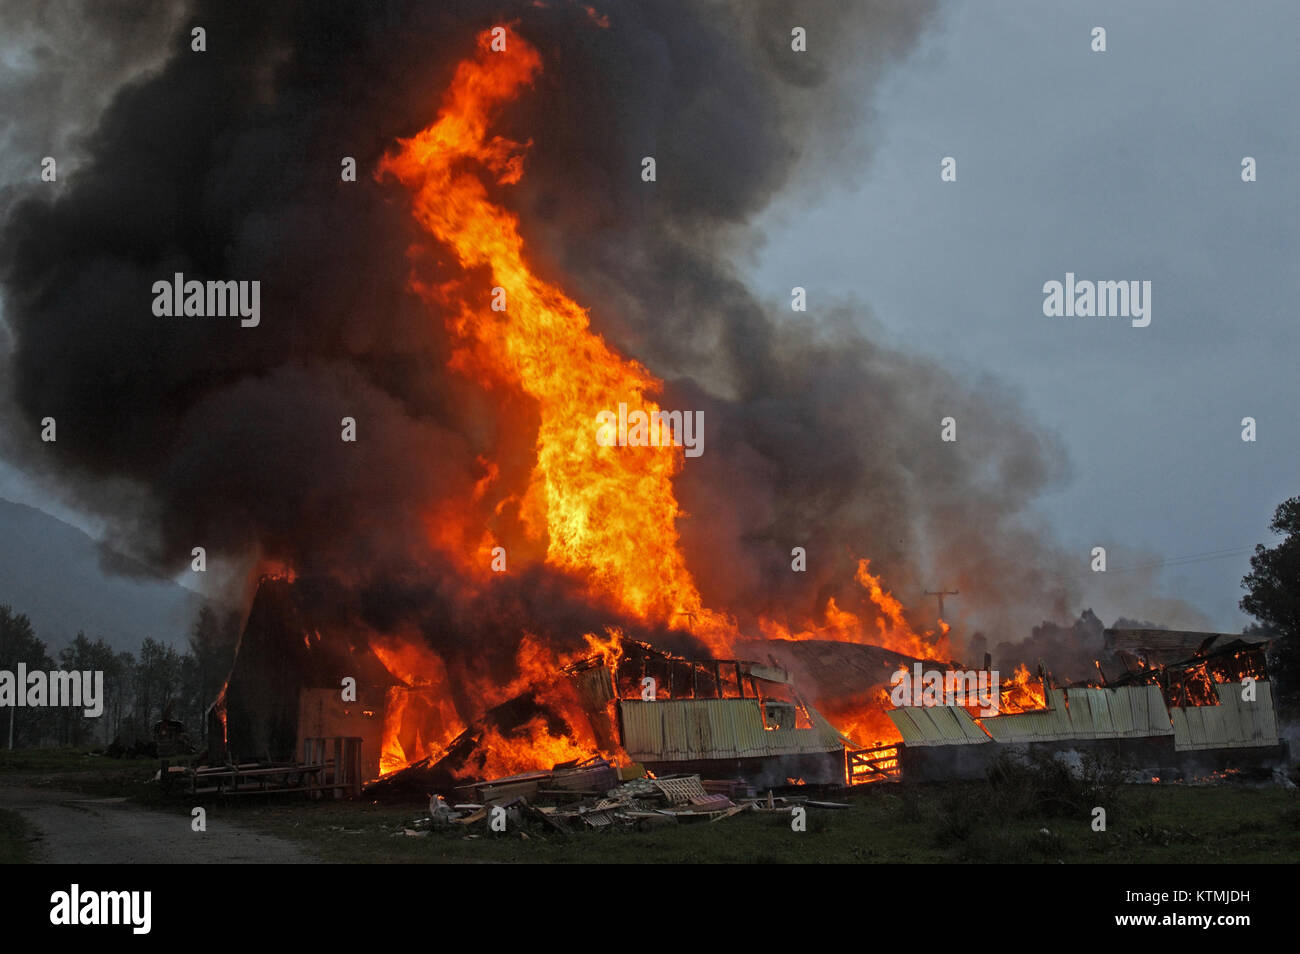 flames and smoke rise from burning farm building Stock Photo